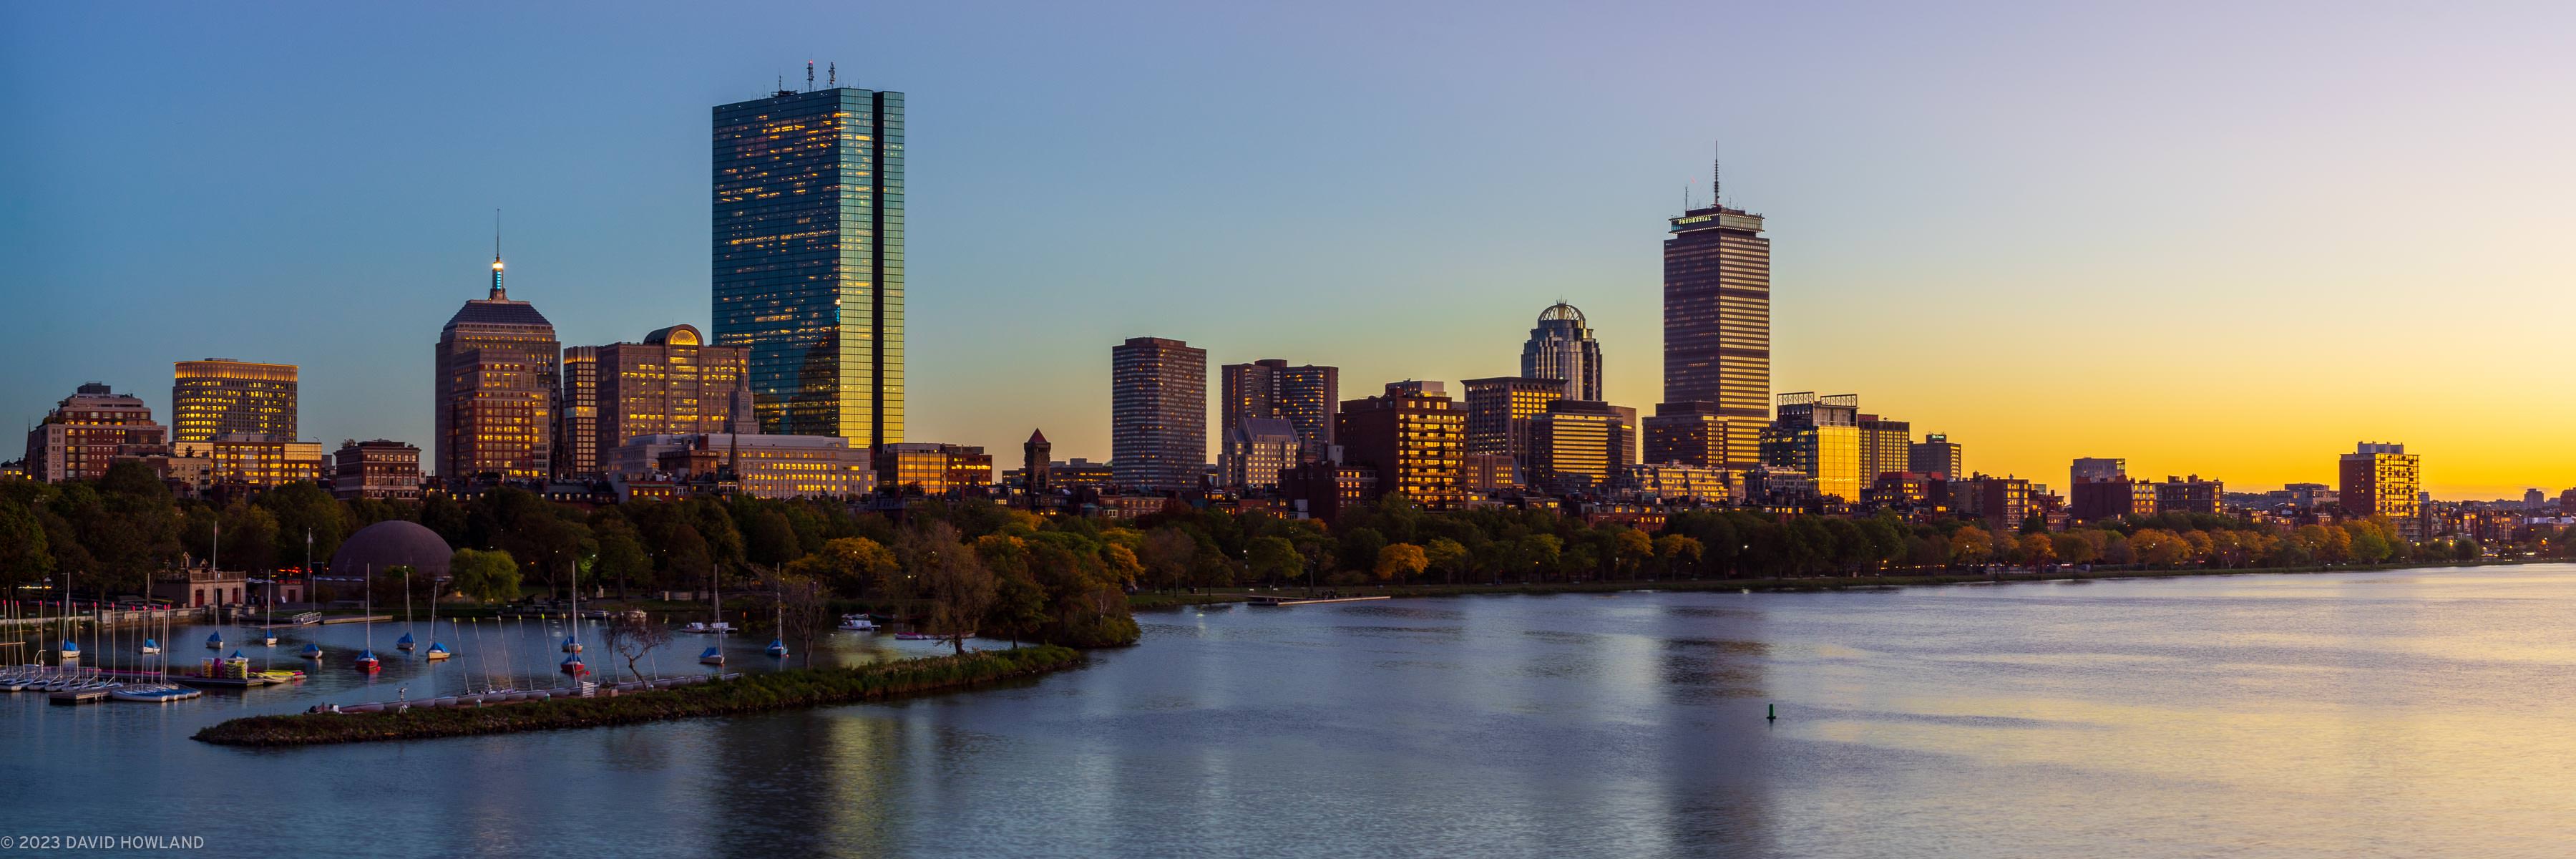 A panorama photo of the illuminated buildings of the Back Bay neighborhood of Boston at sunset.